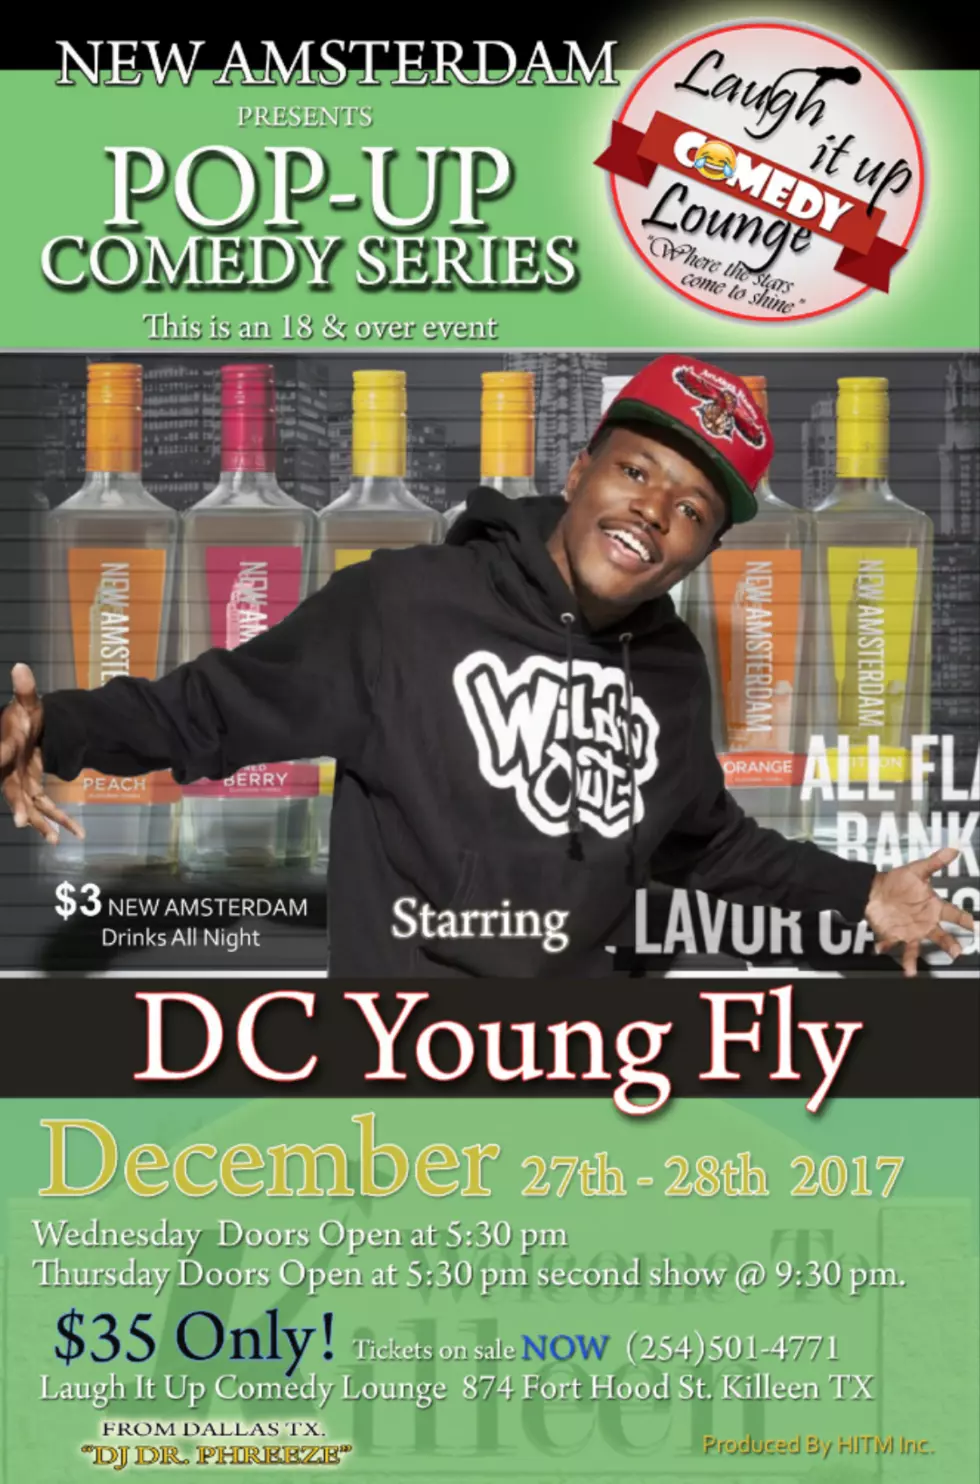 D.C. Young Fly Comedy Show is 18 and Up!